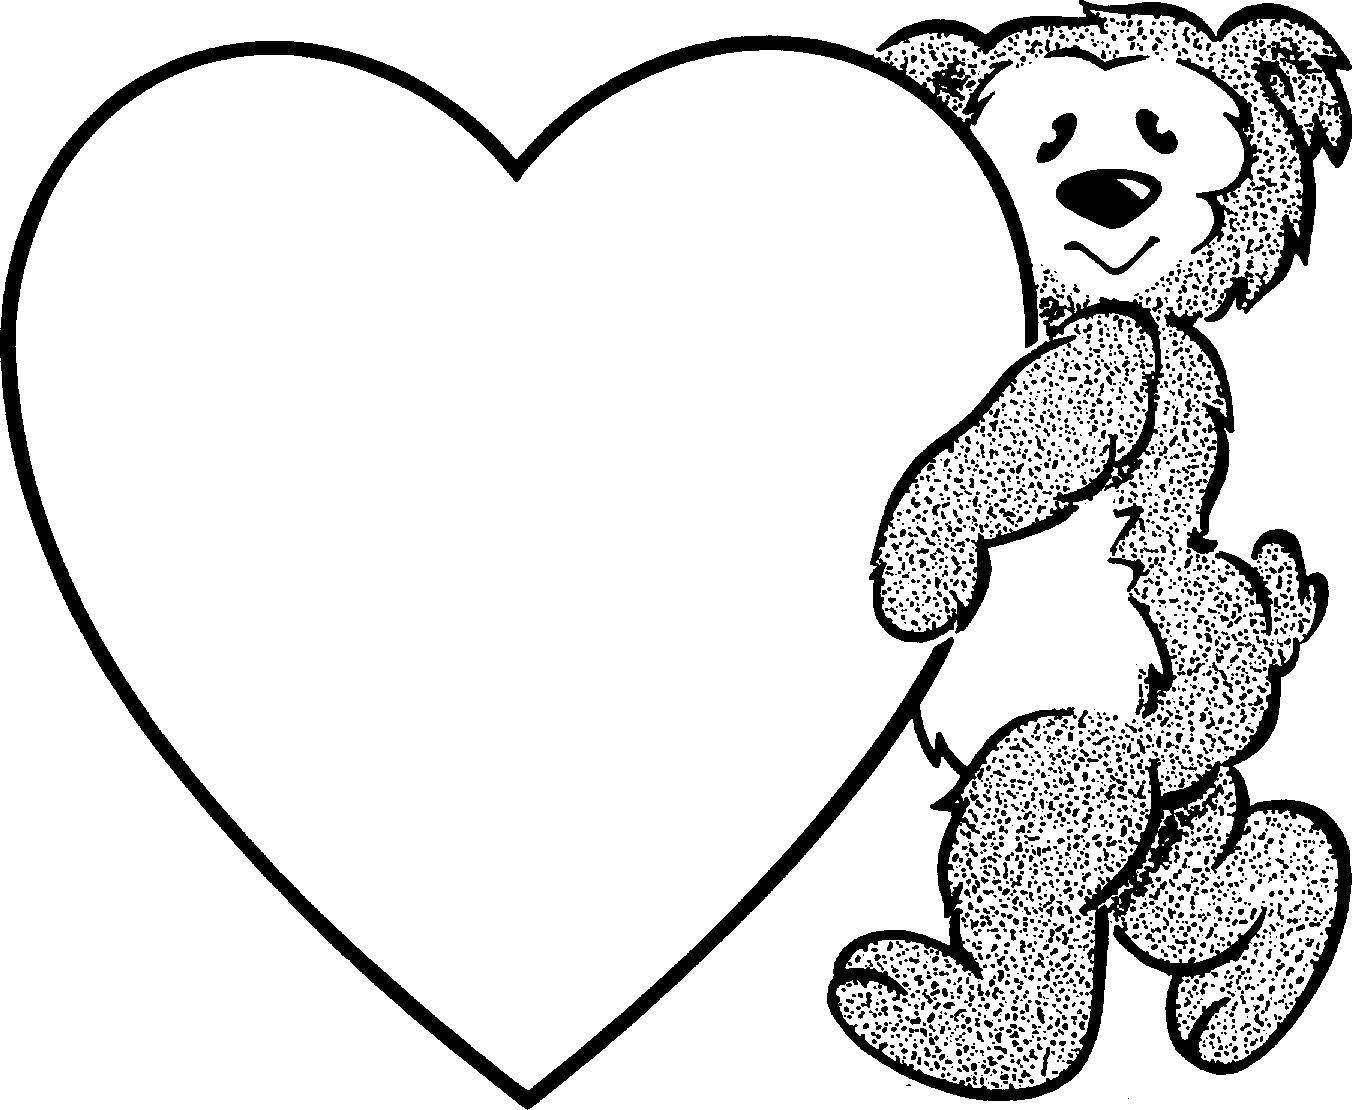 Coloring Bear with heart. Category Hearts. Tags:  Heart, love.